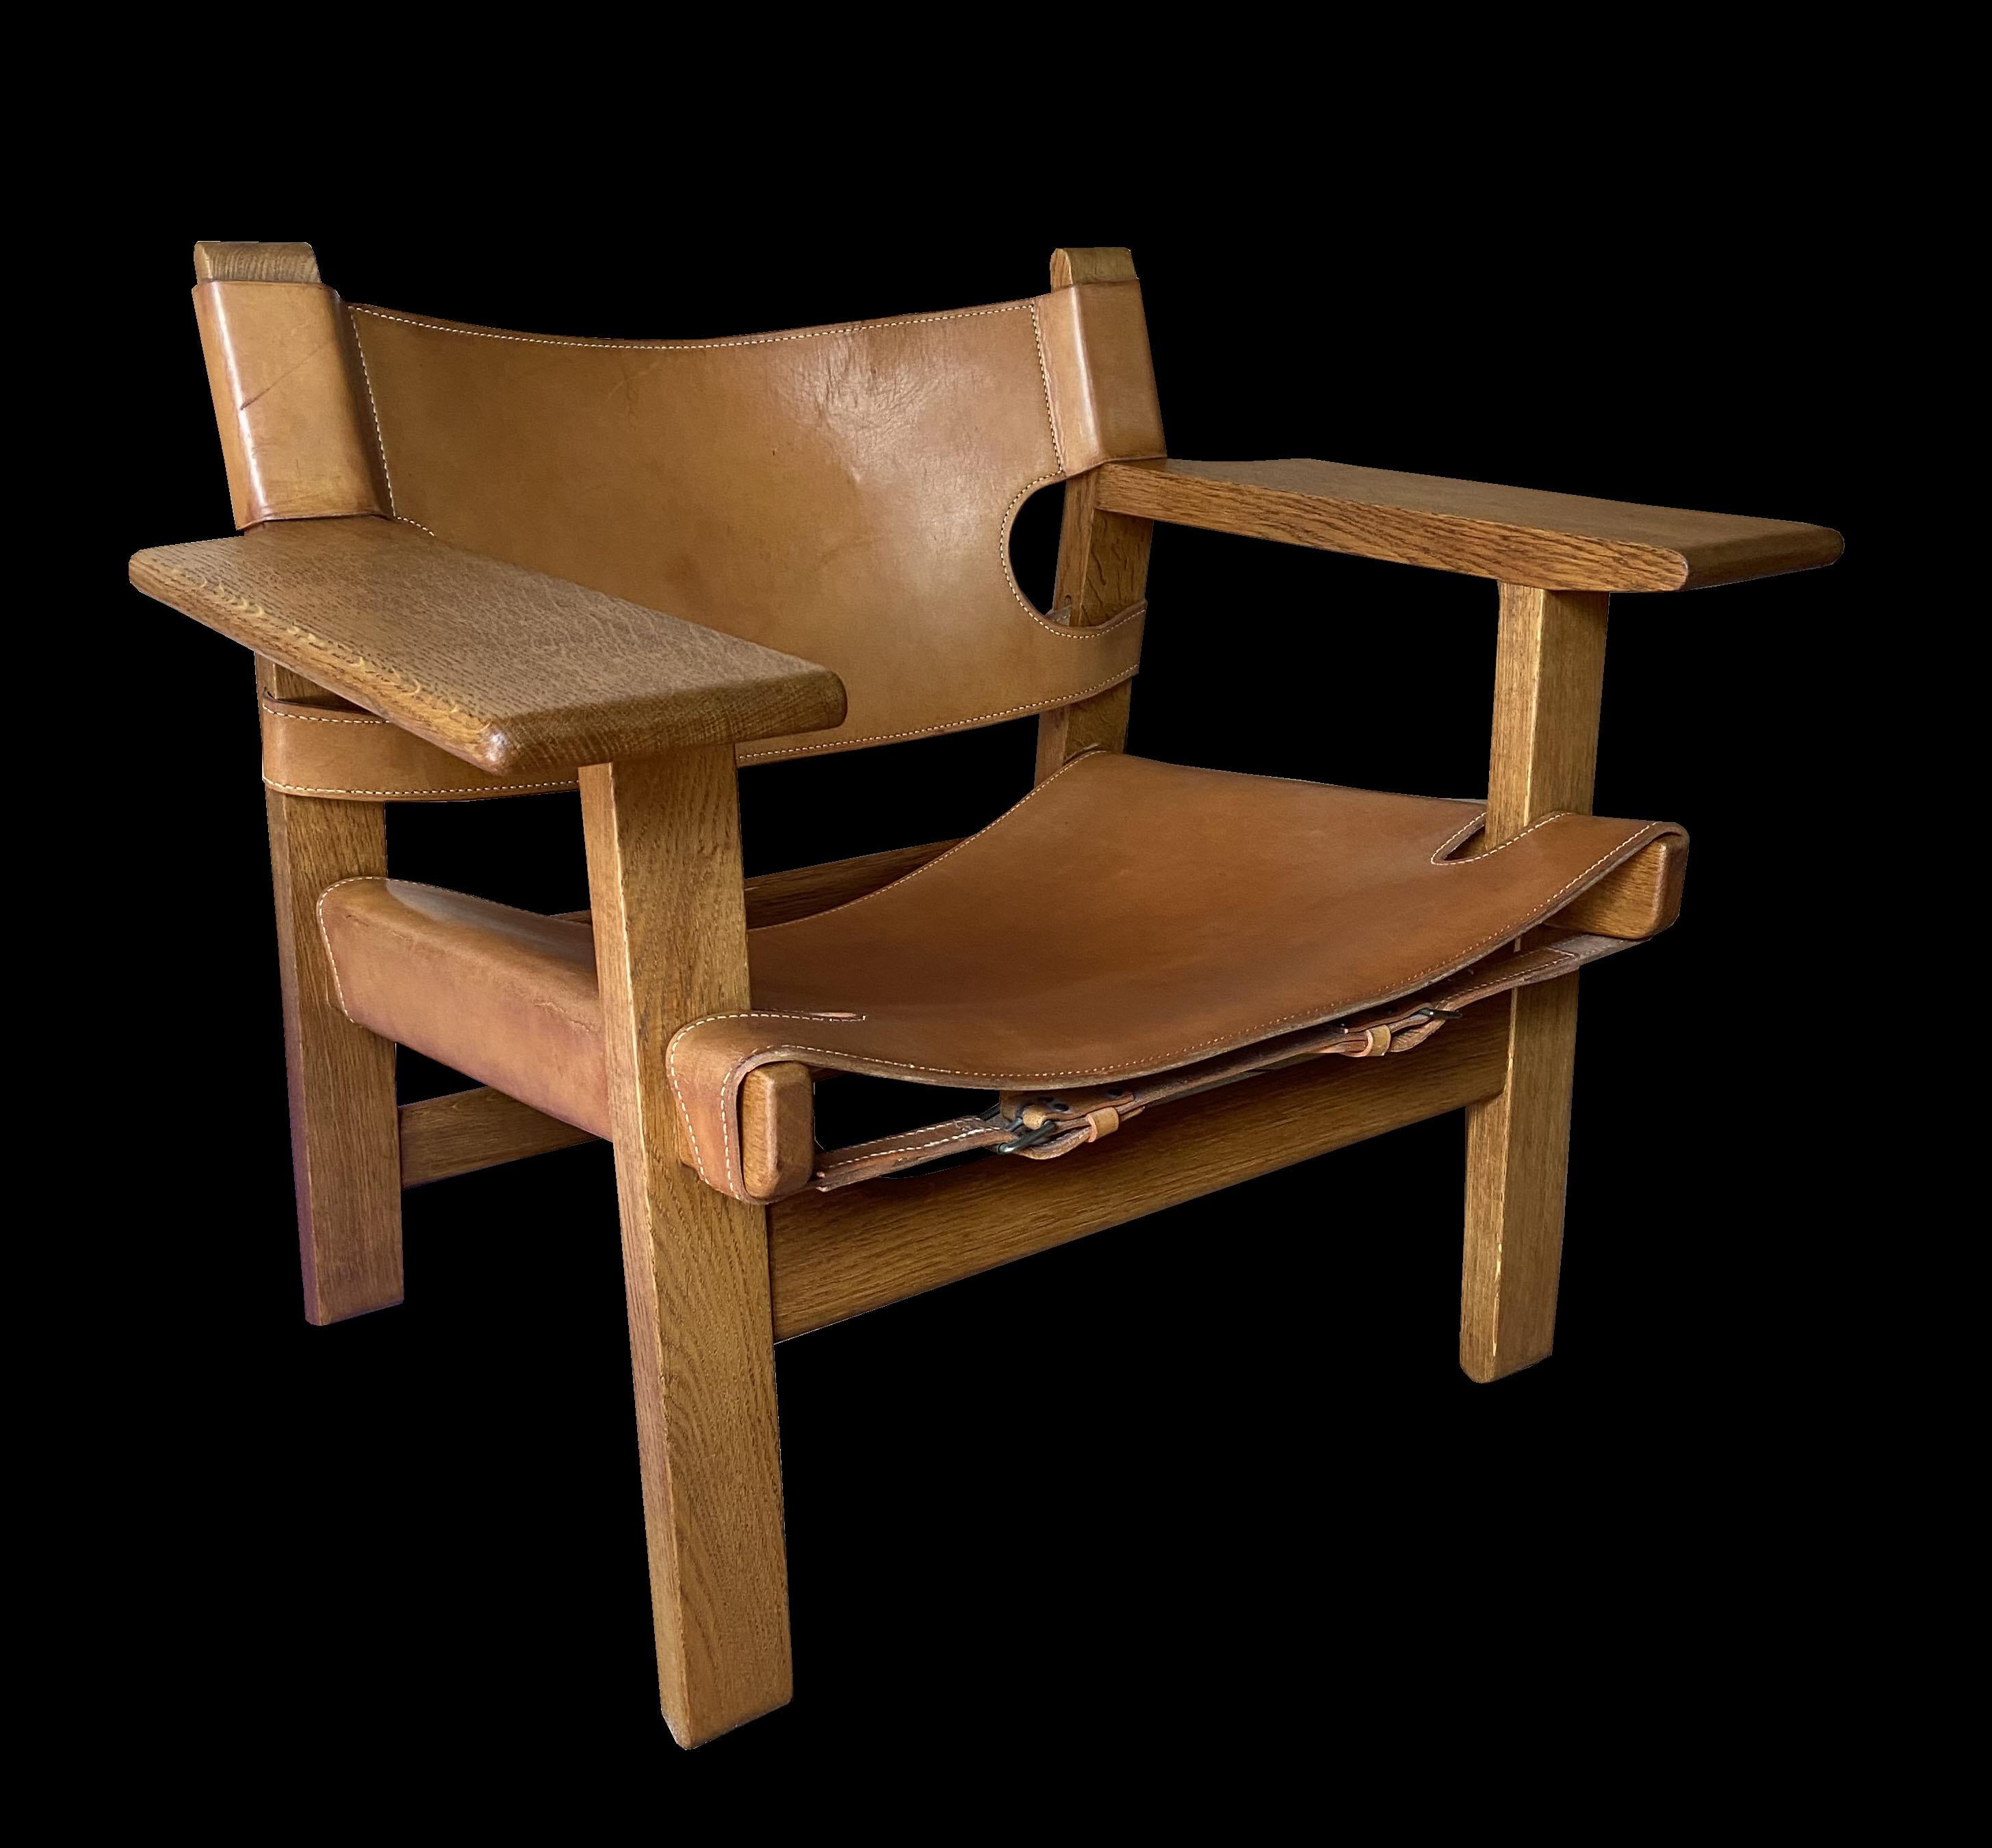 A Very nice clean example of the classic Spanish chair by Mogensen, this is one of the earlier examples with the double rear stretchers. The Oak and leather are both in very good condition, no horrid stains or breaks as (hopefully!) the photos show.